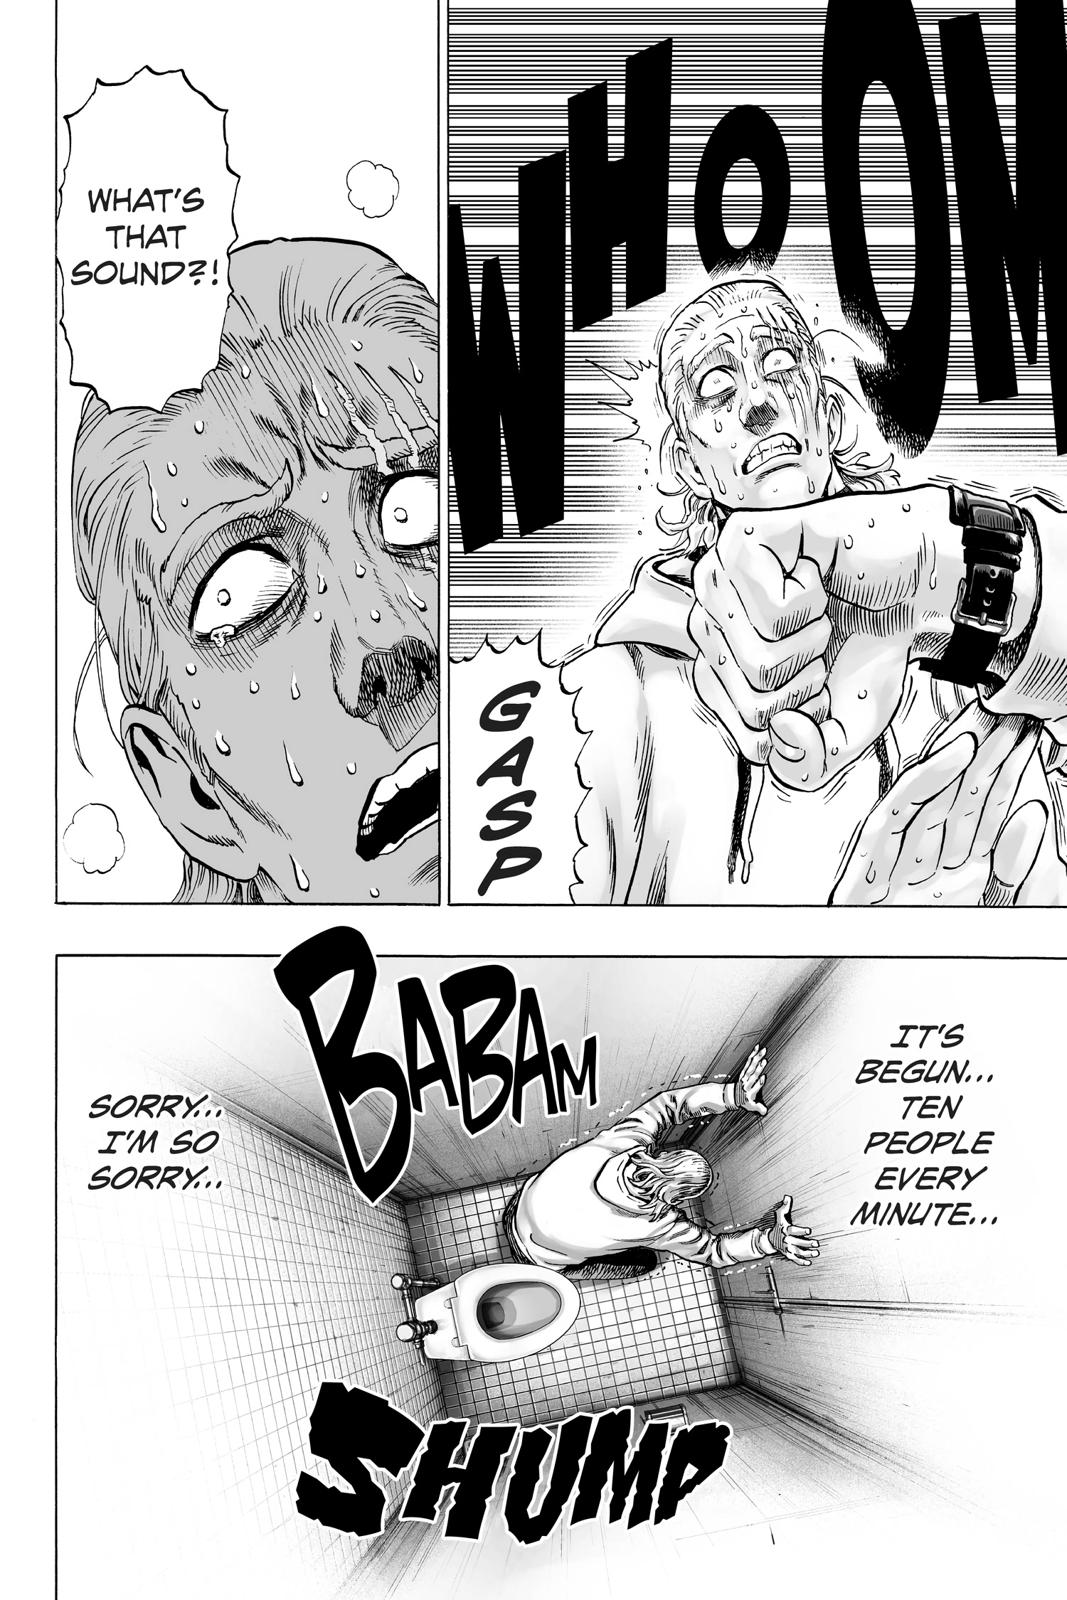 One-Punch Man, Punch 38 image 33